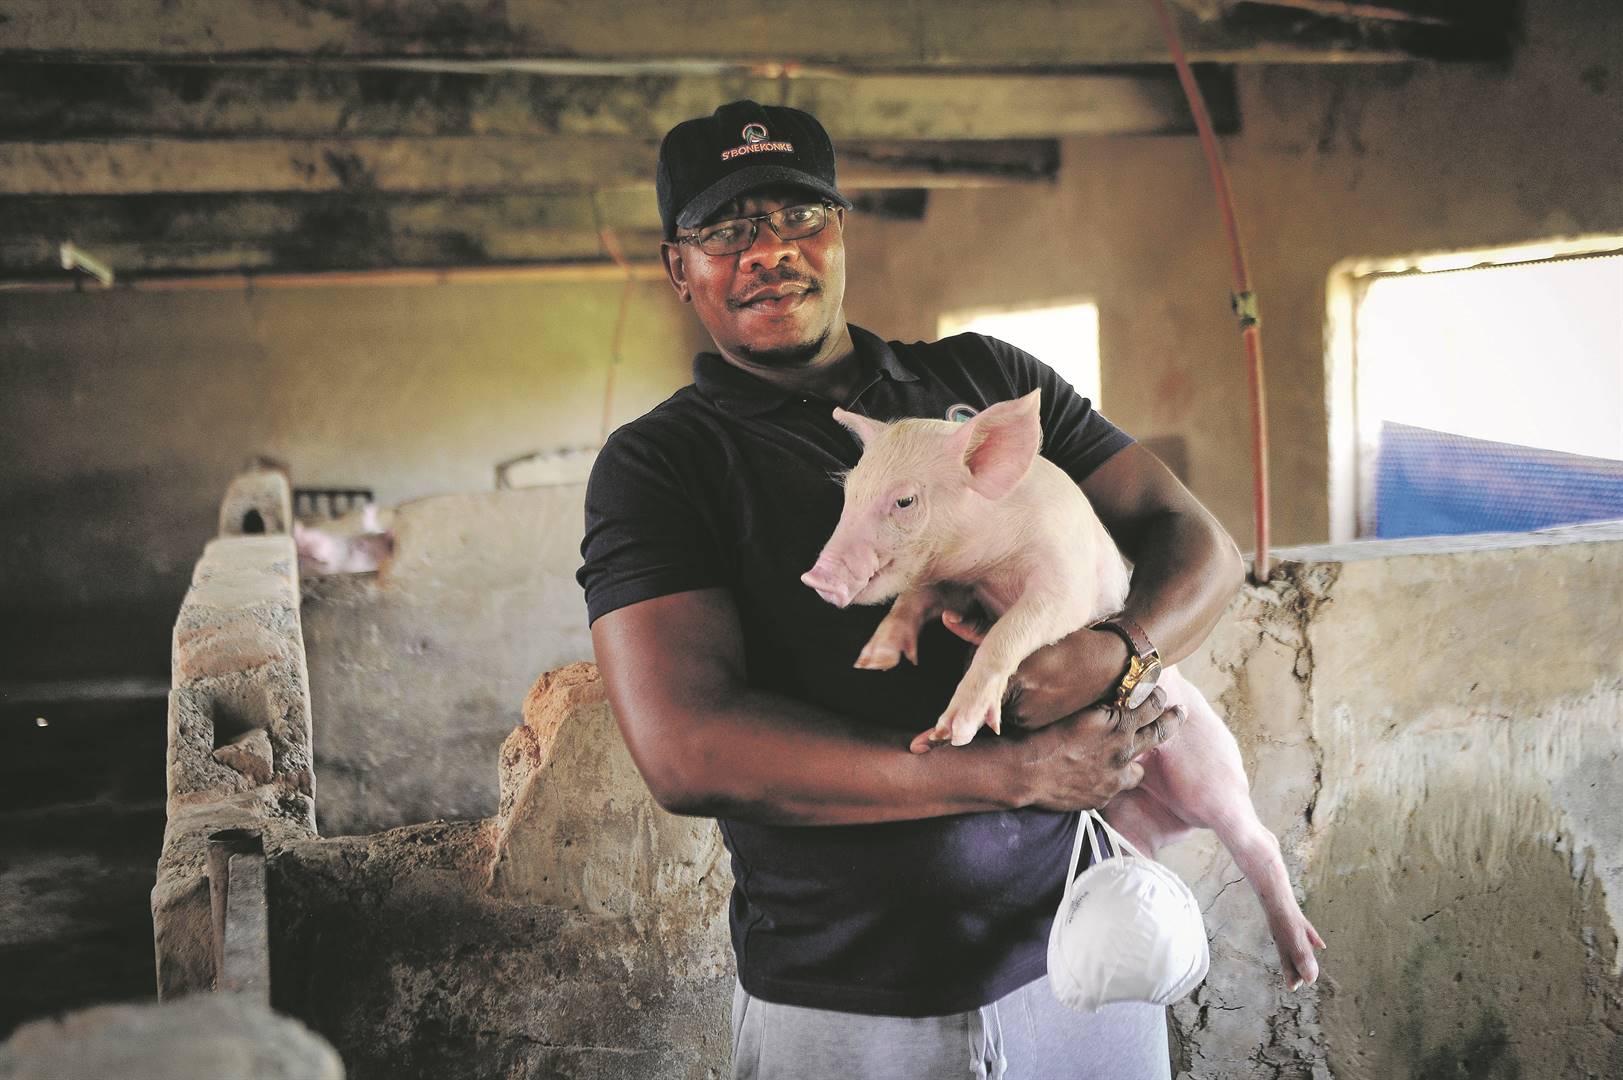 Reggie Mkhize with one of the weaners at his farm in Brakpan